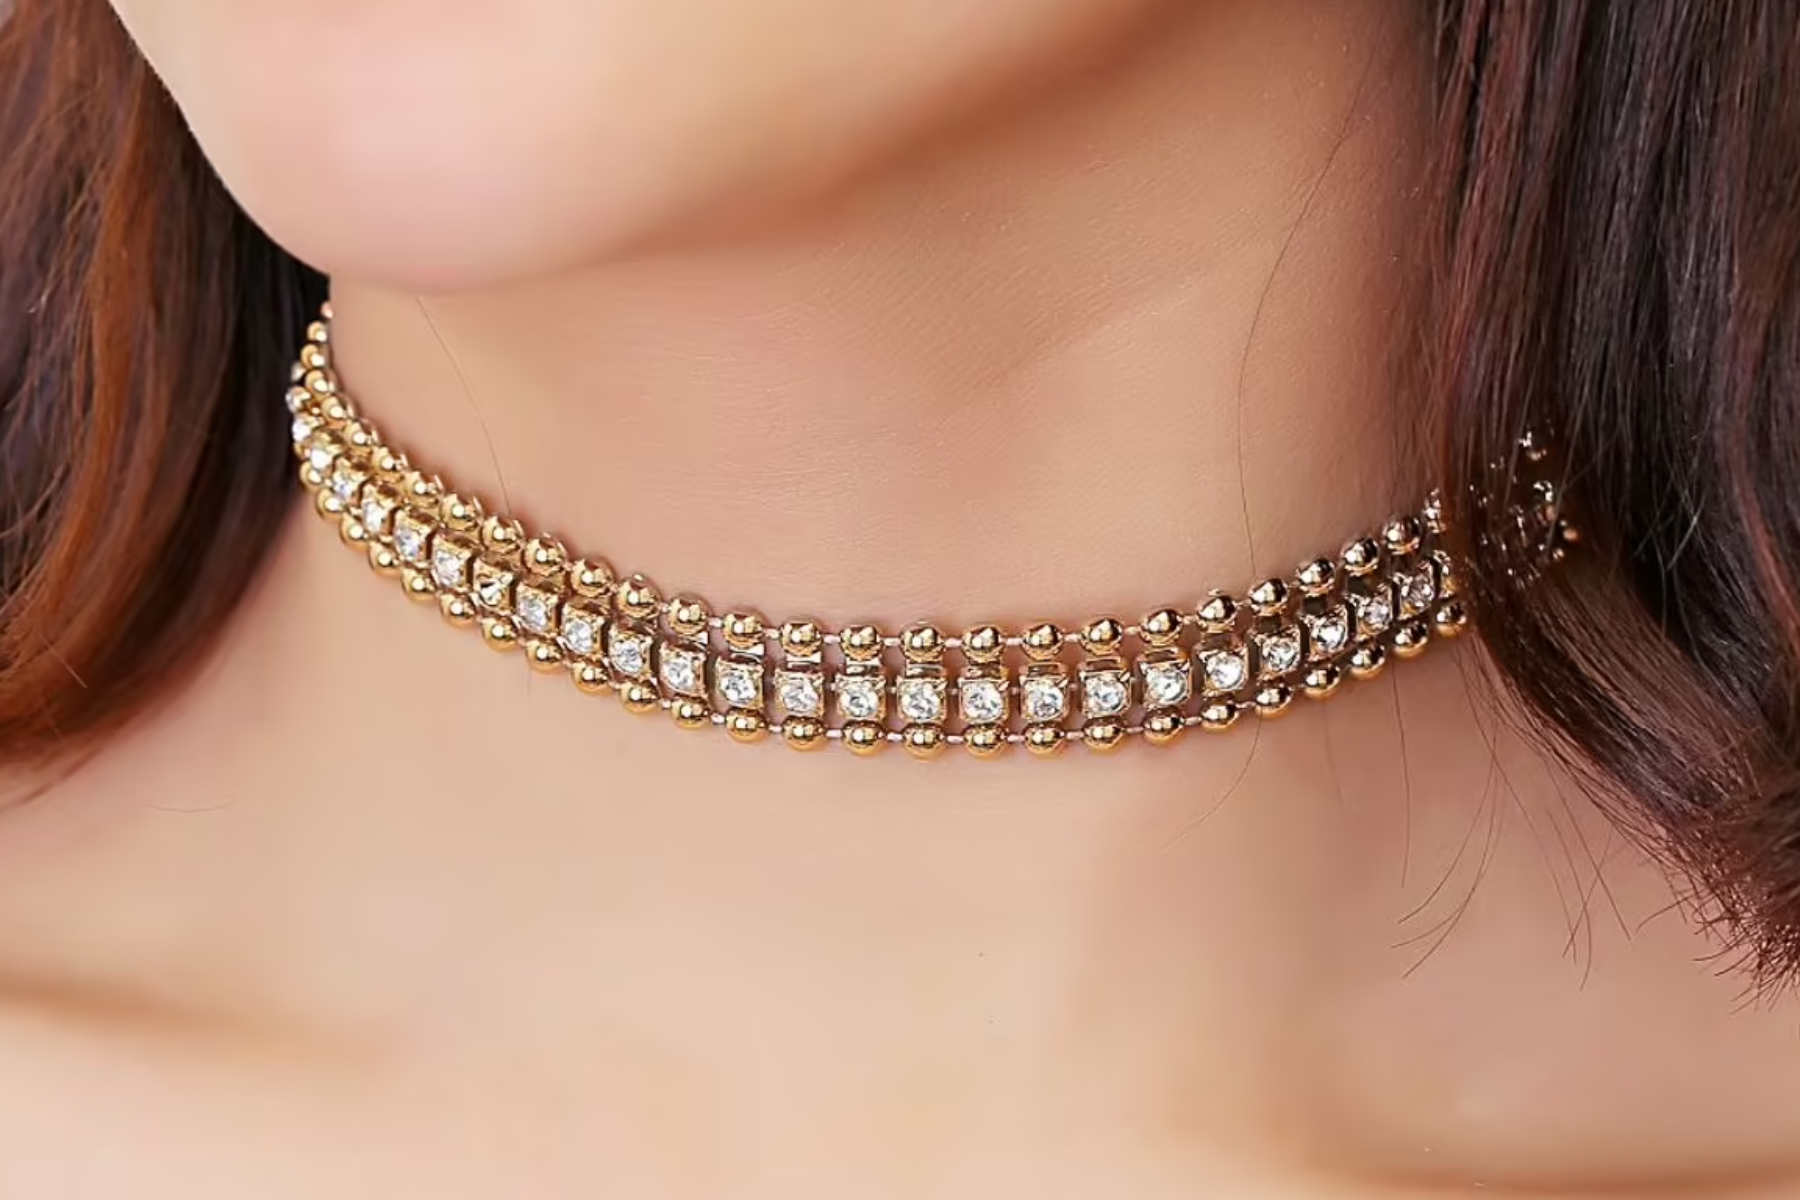 Choker Necklaces For Girls - A Trendy Accessory That's Here To Stay